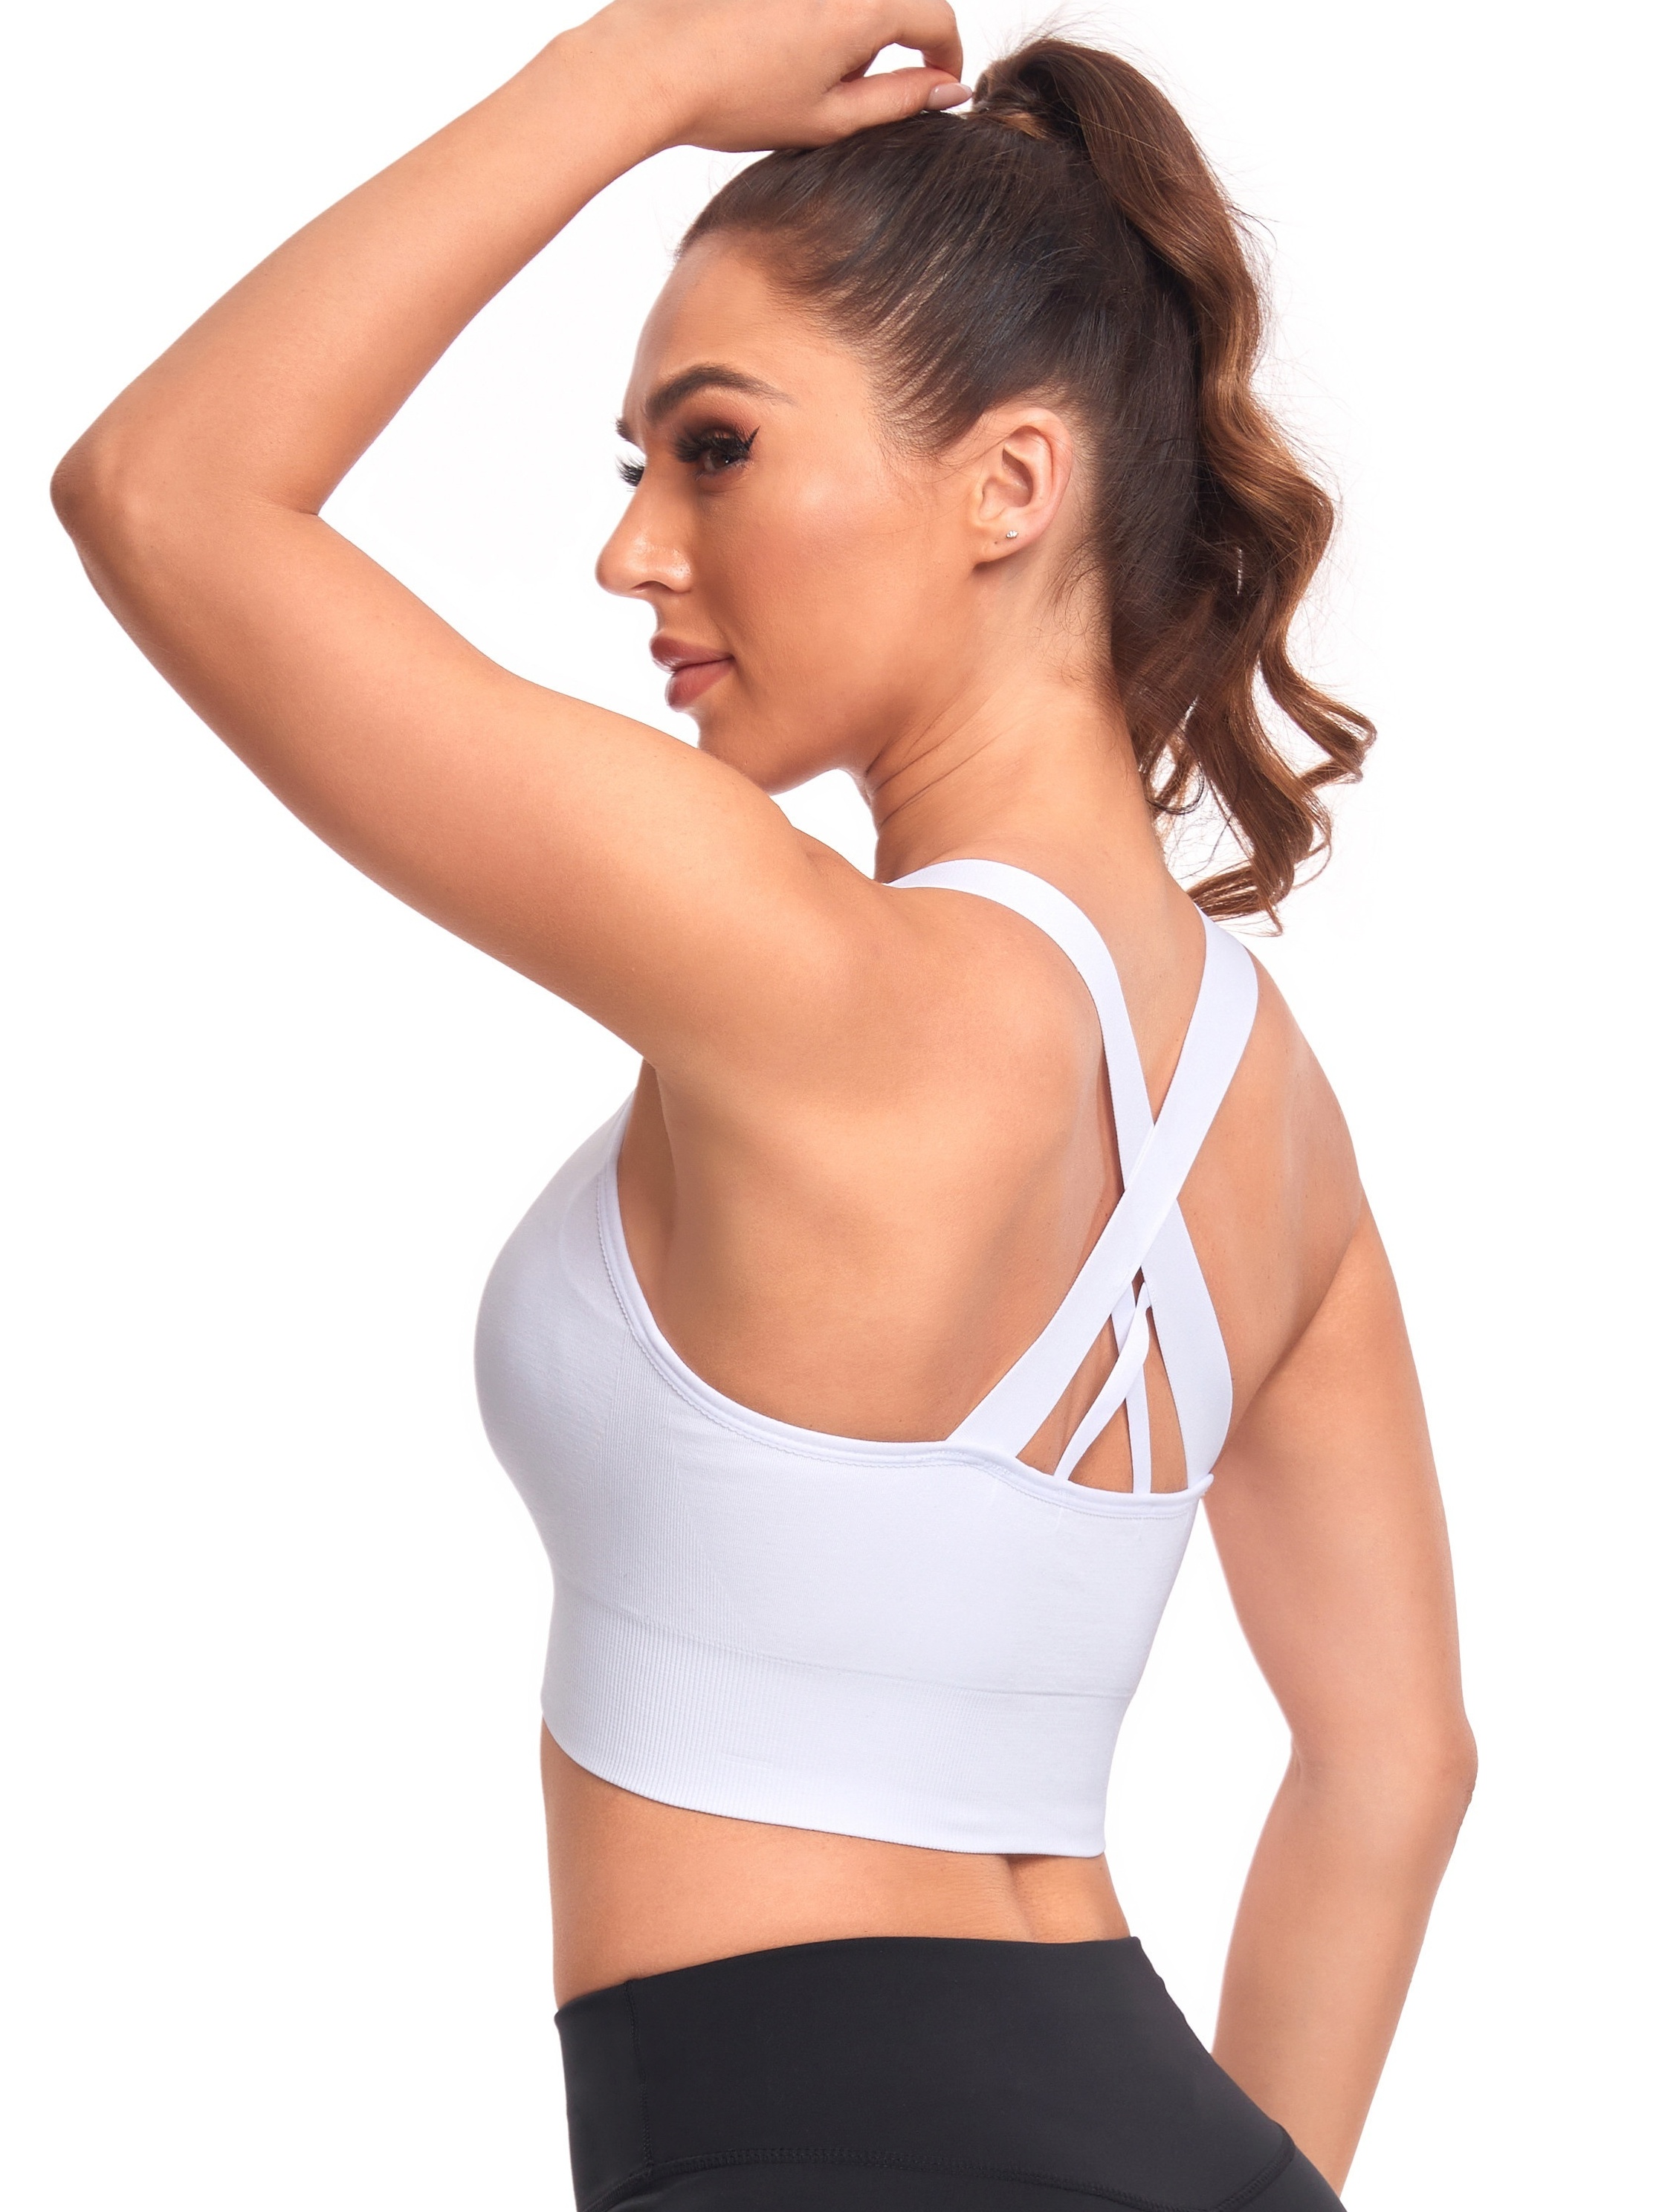 Women's Push Up High Impact Sports Bra Sports Bras Cute Workout Sexy for  Large Bust Camisole Cami Supportive Gym Yoga White